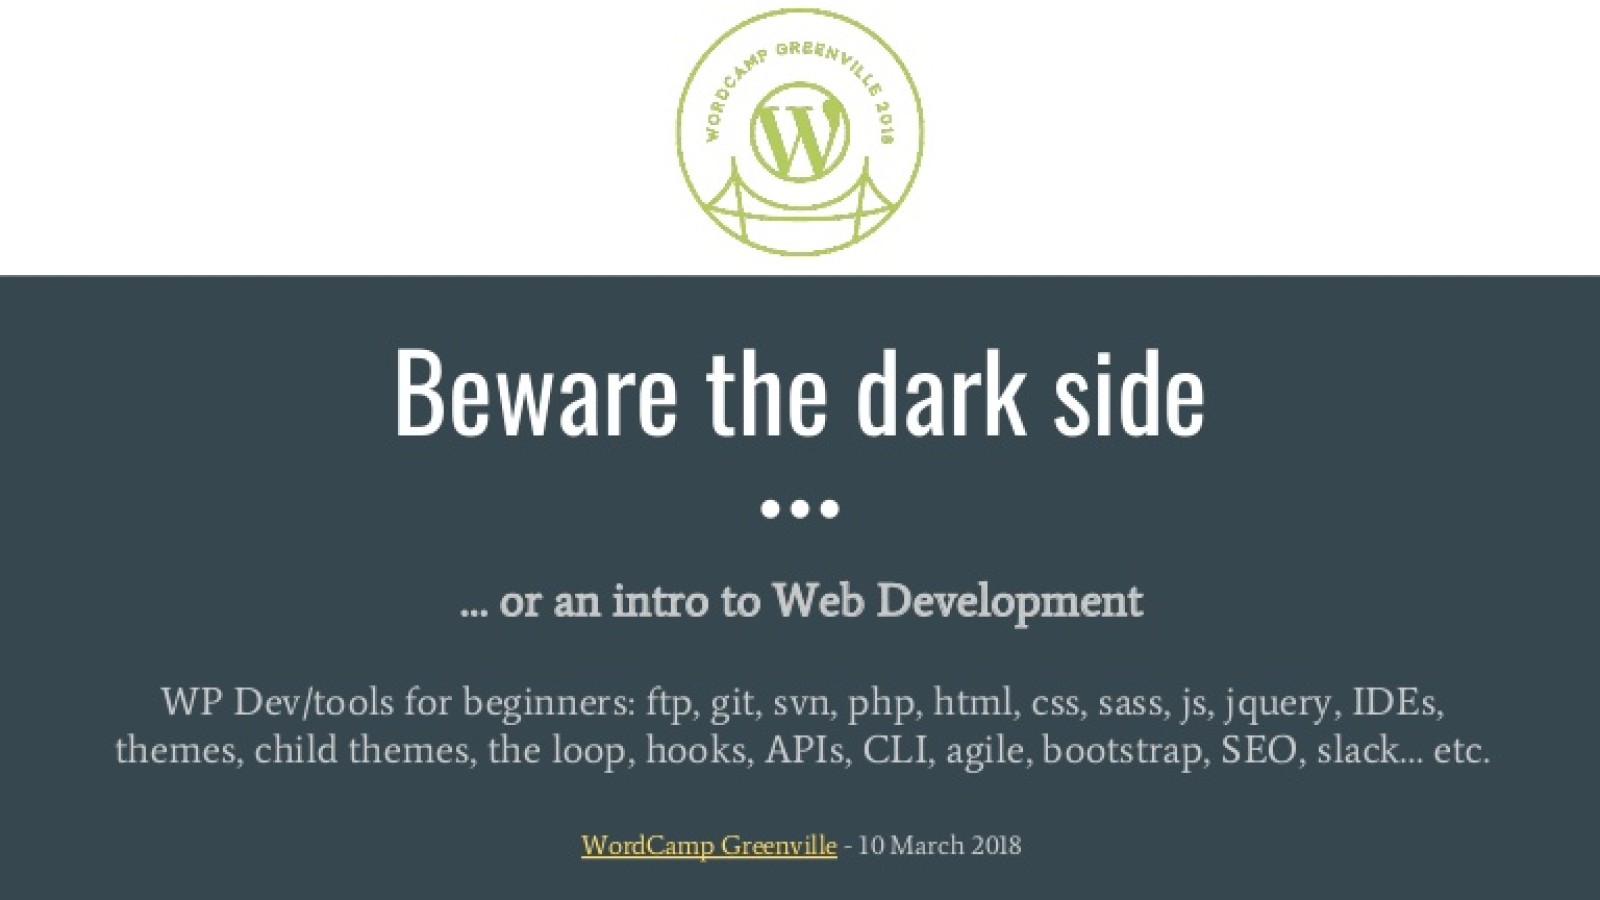 Beware the dark side, or an Intro to Development